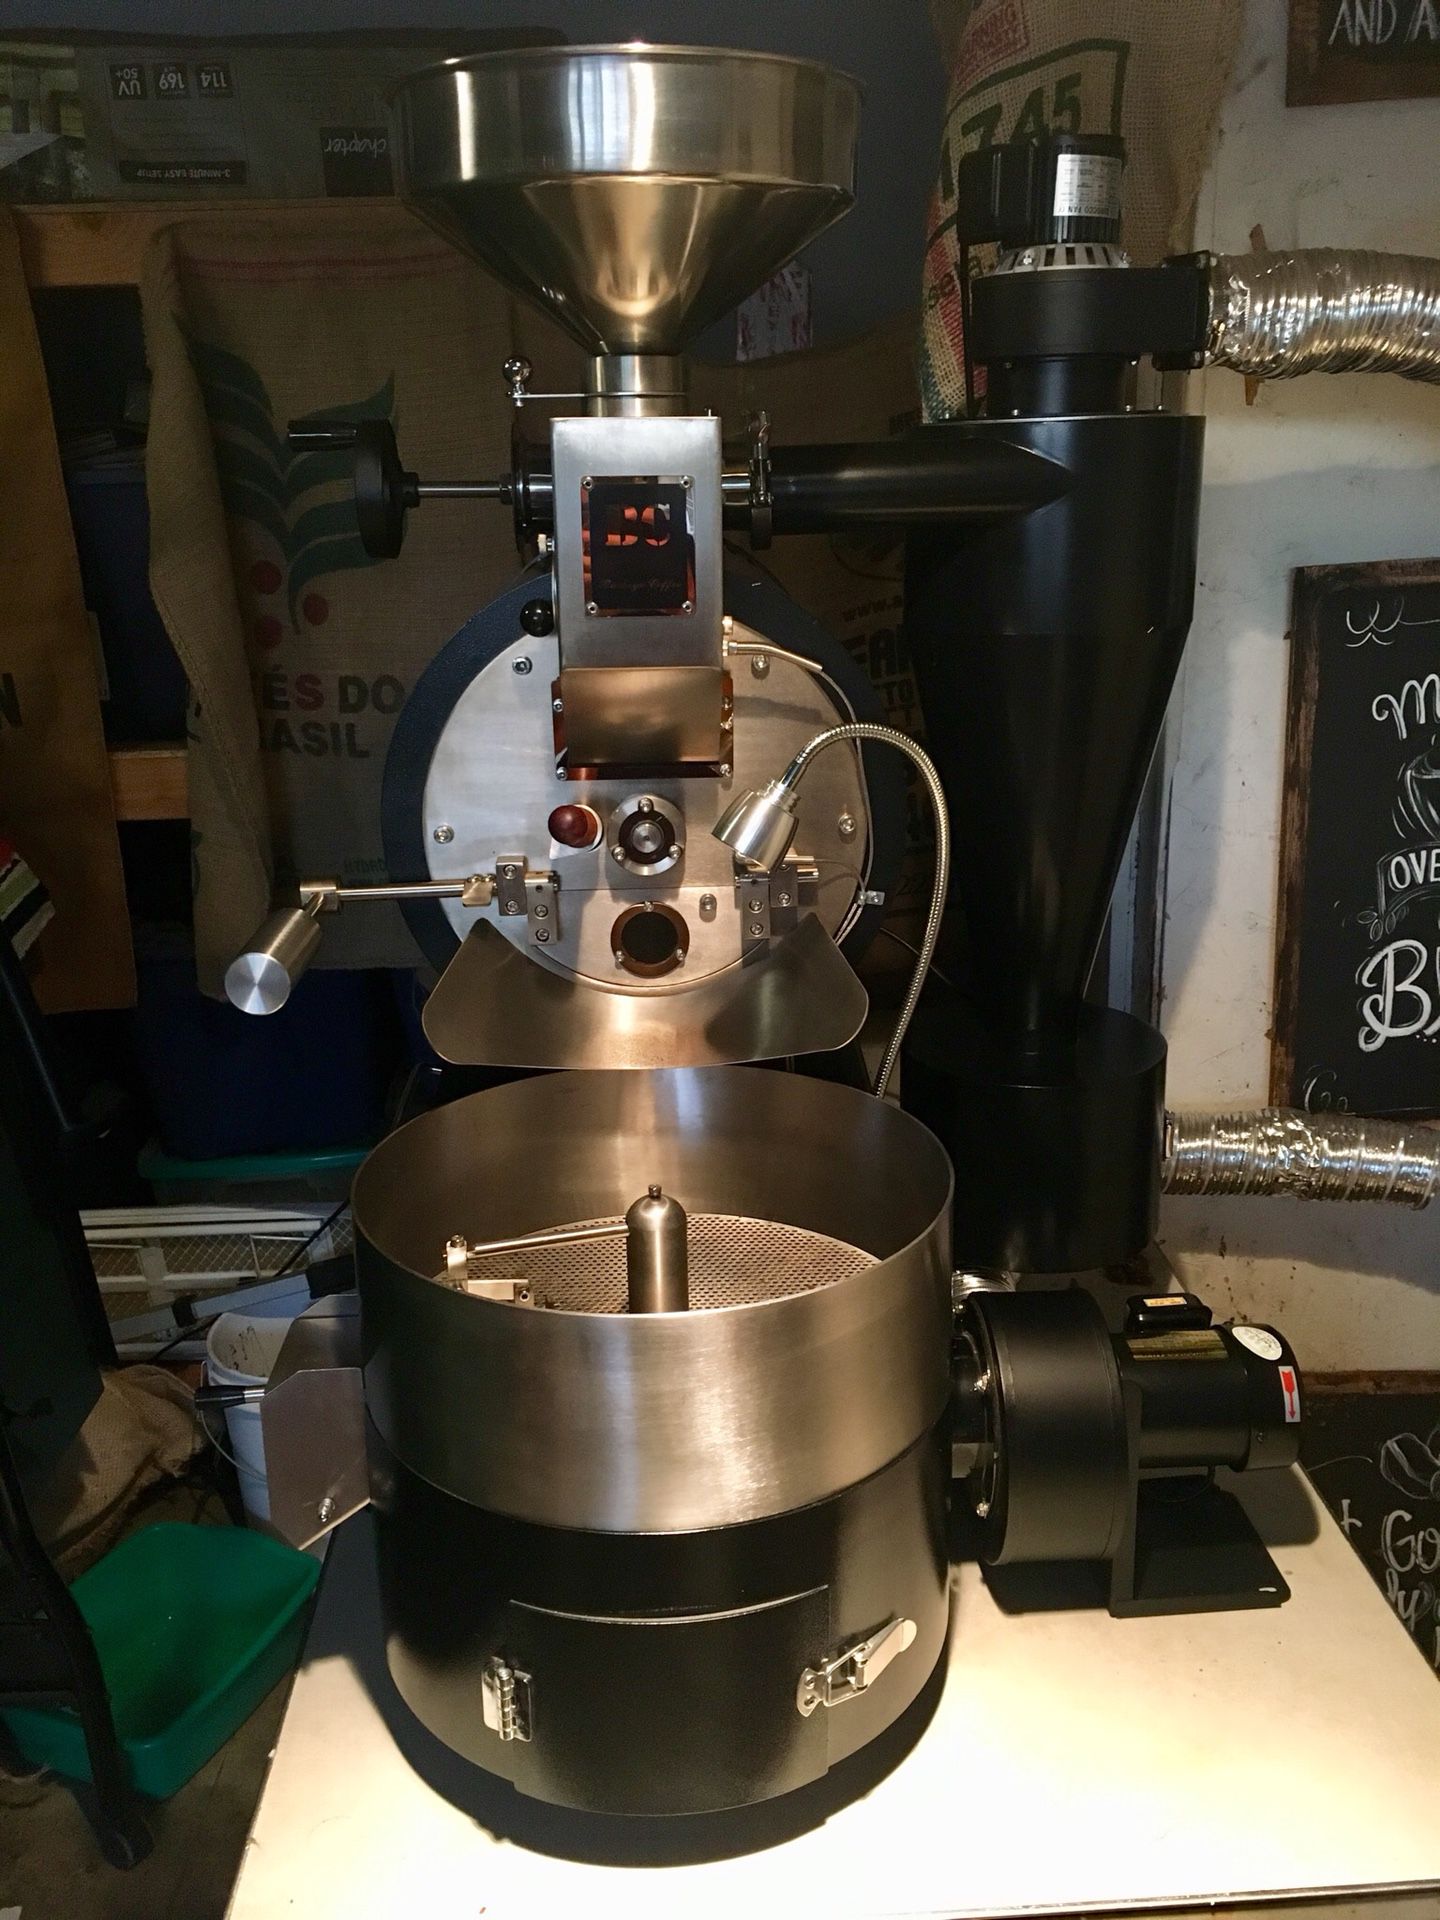 New unopened Mr. Coffee Cocomotion Hot Chocolate Maker. for Sale in Smyrna,  GA - OfferUp